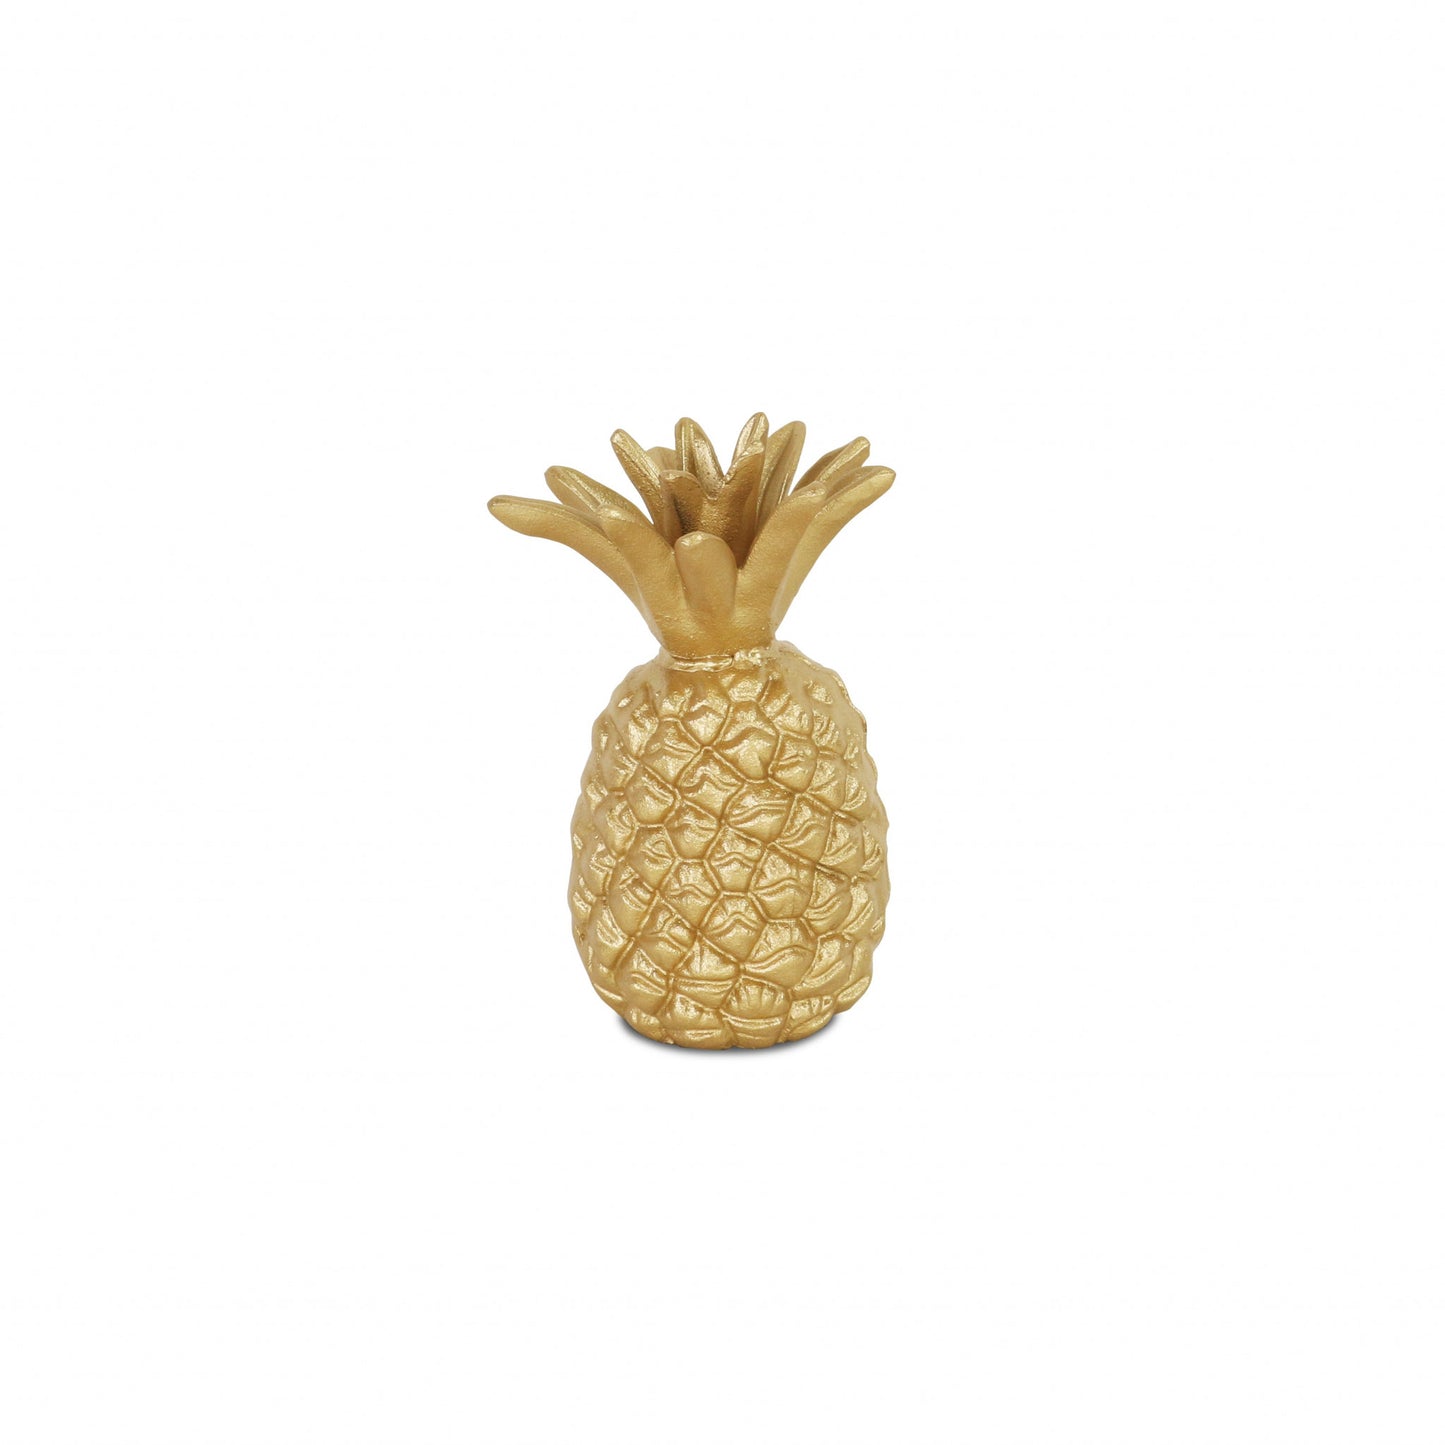 8" Gold Cast Iron Pineapple Hand Painted Sculpture